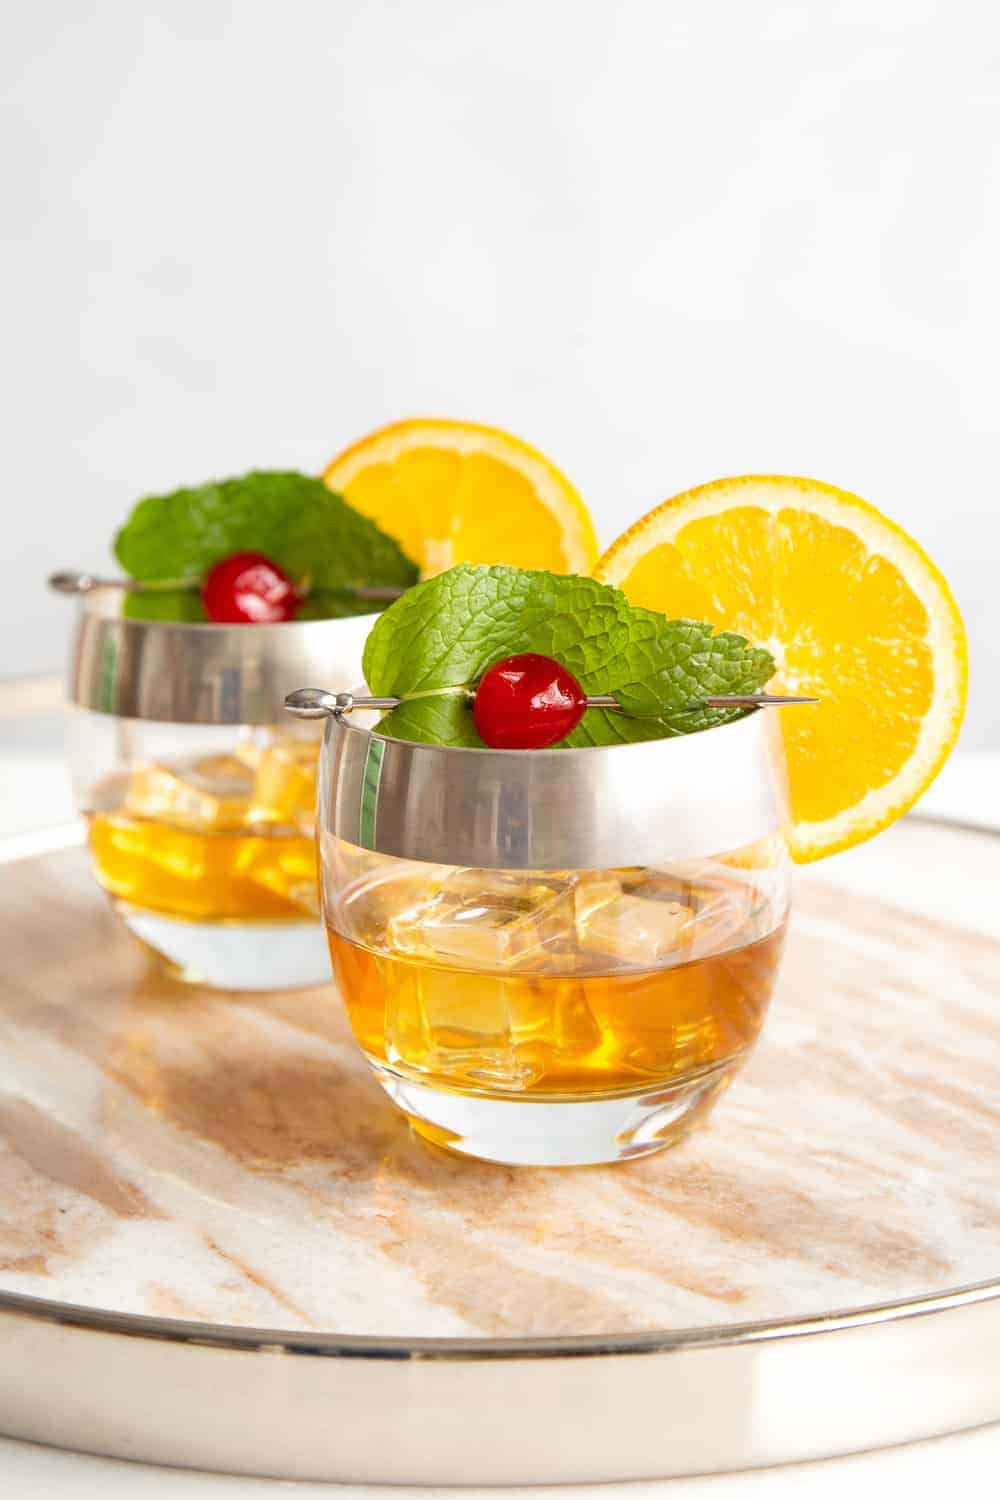 The New Fashioned Cocktail: An Old Fashioned with Fresh Mint